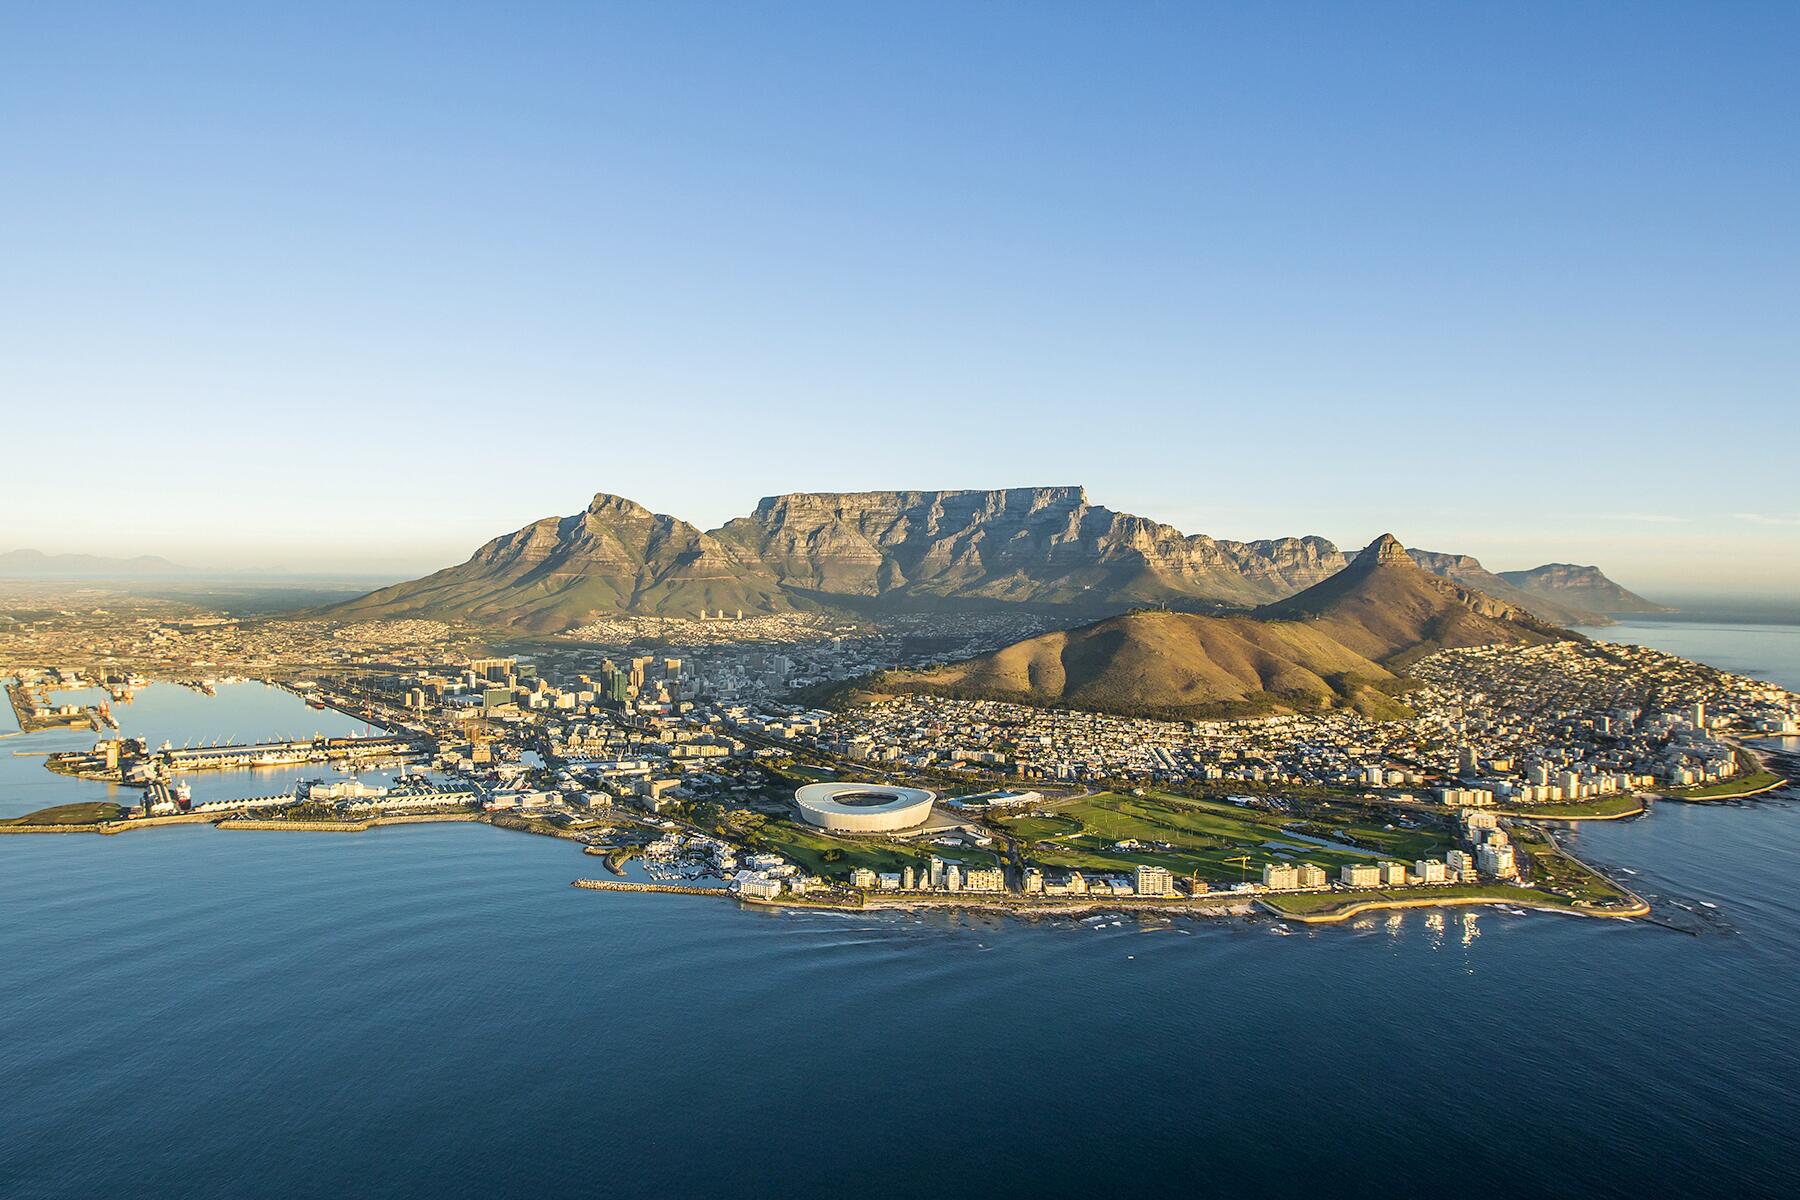 <a href='https://www.fodors.com/world/africa-and-middle-east/south-africa/cape-town-and-peninsula/experiences/news/photos/table-mountain-101-everything-you-need-to-know-about-visiting-cape-towns-iconic-landmark#'>From &quot;Table Mountain 101: Everything You Need to Know About Visiting Cape Town's Iconic Landmark: Why Is It Such a Big Deal?&quot;</a>